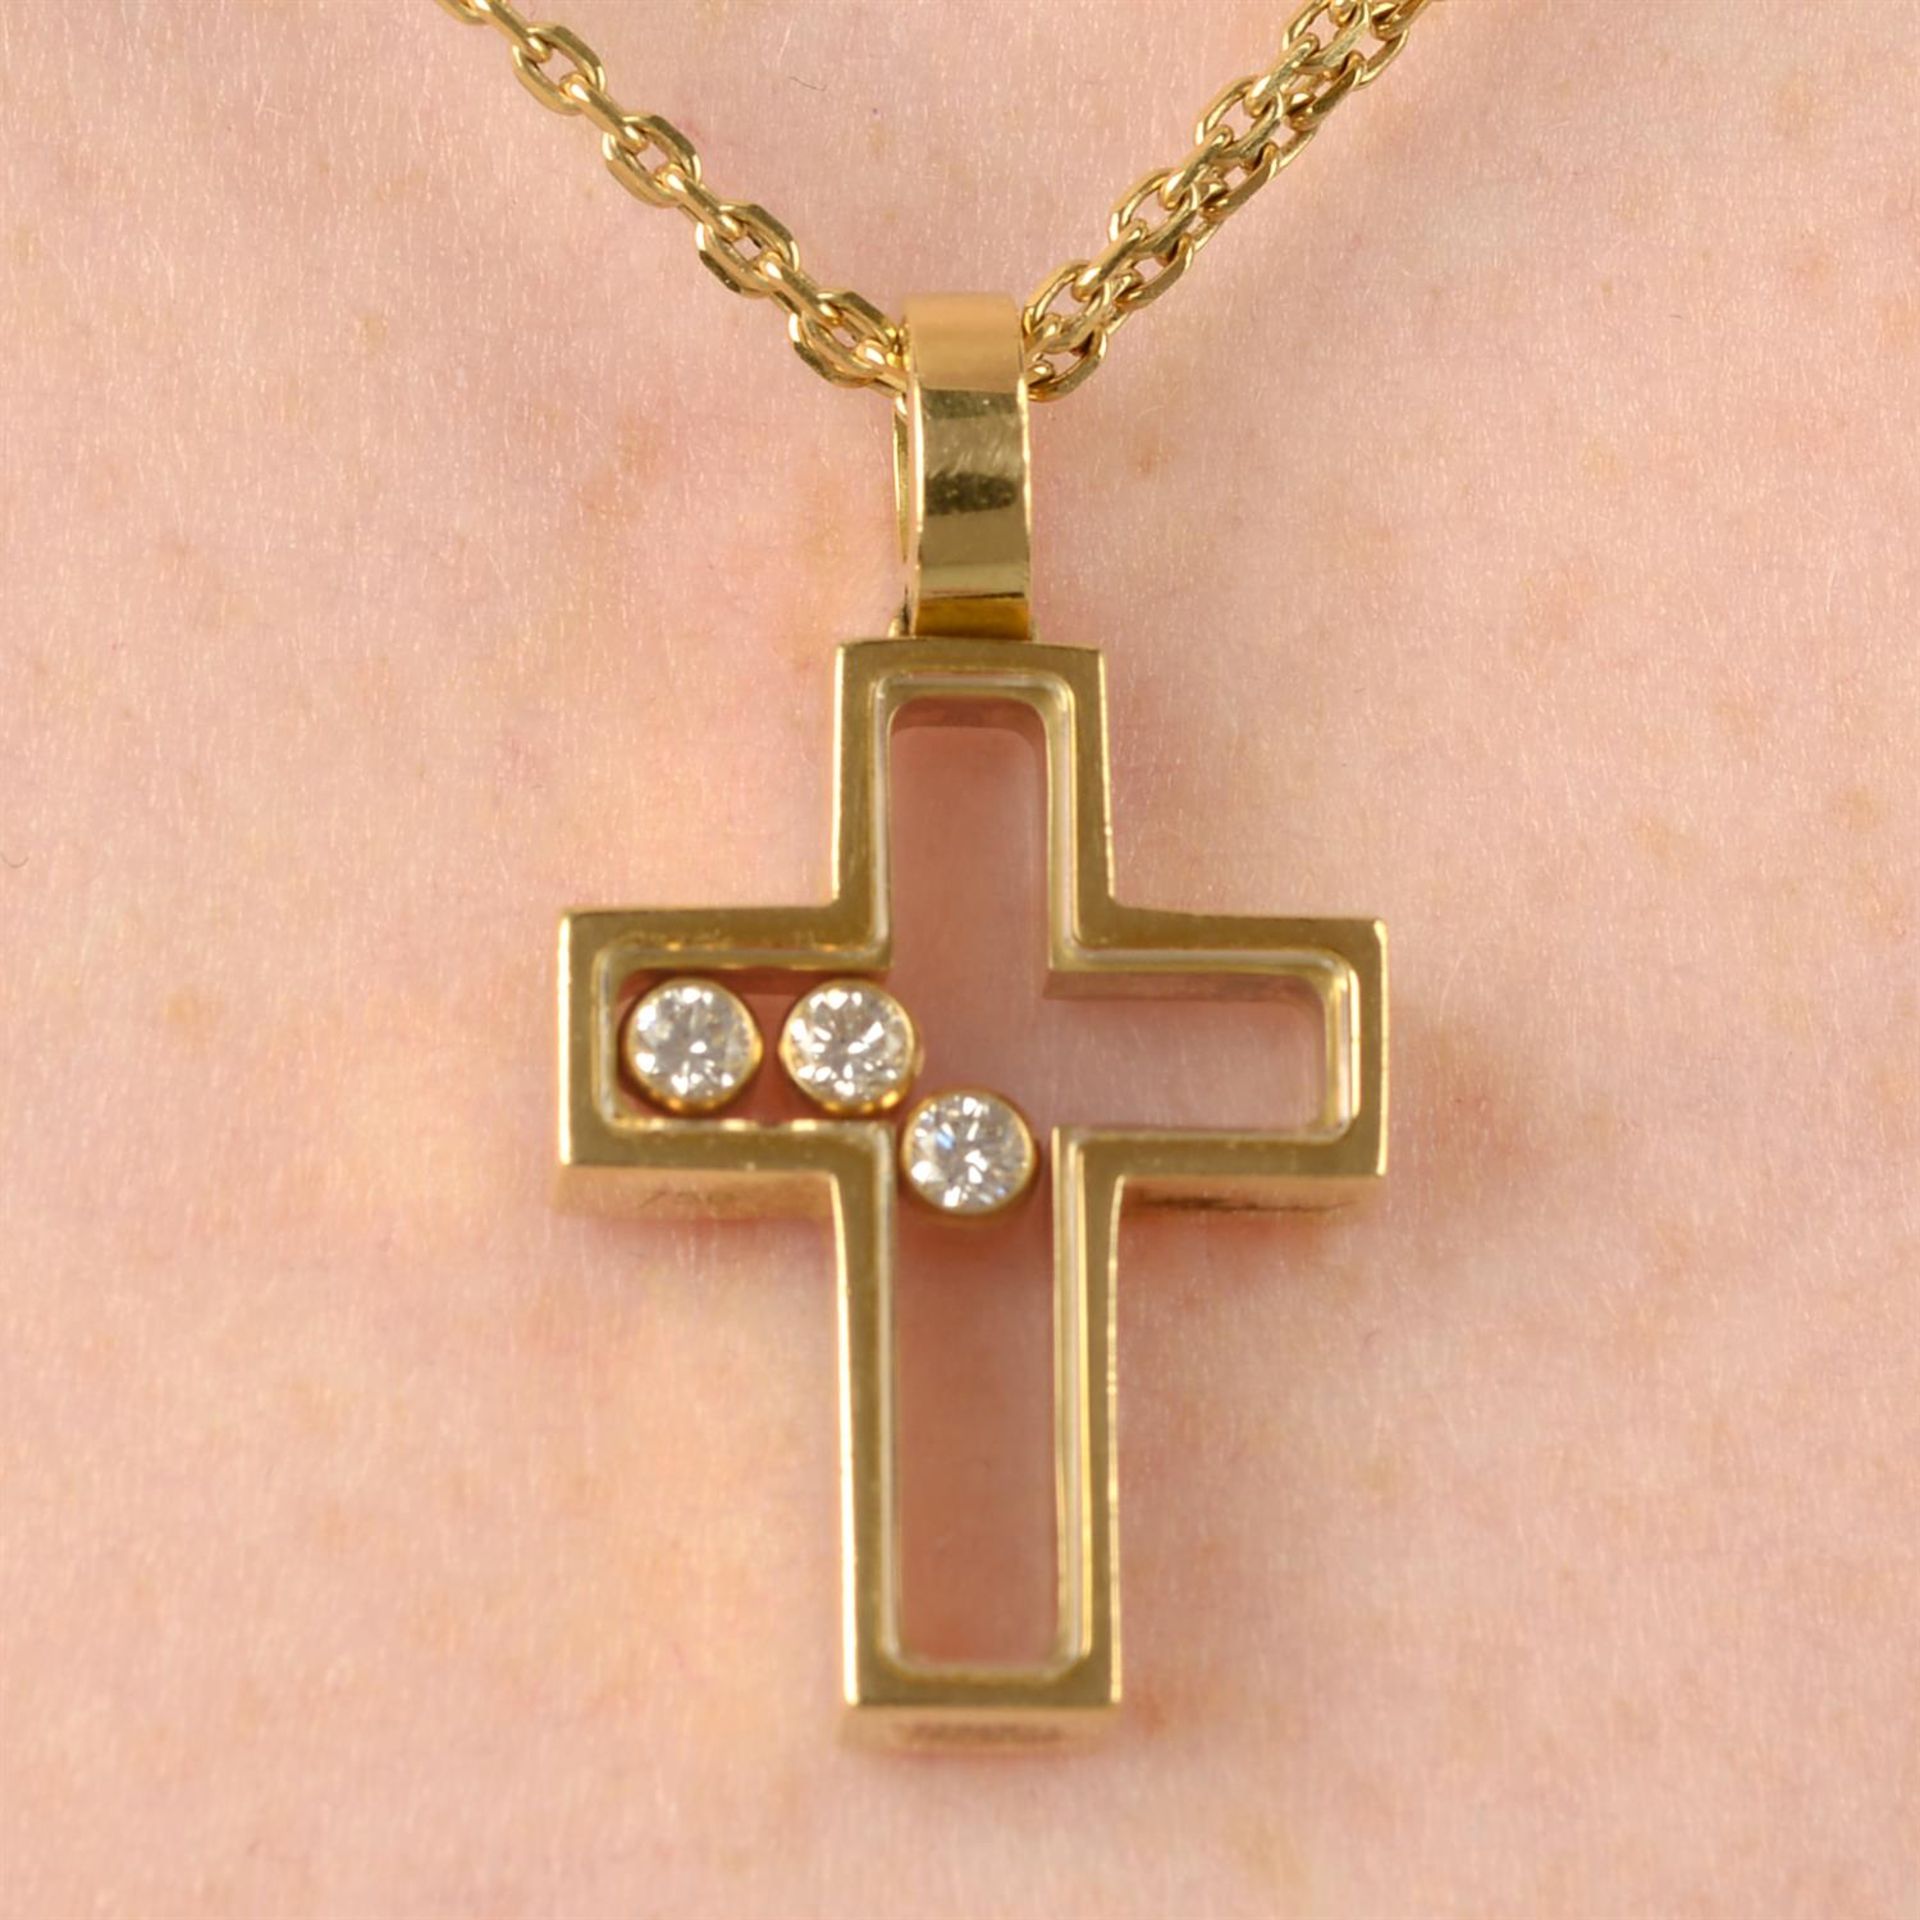 A 'Happy Diamonds' cross pendant, with 18ct gold chain, by Chopard.